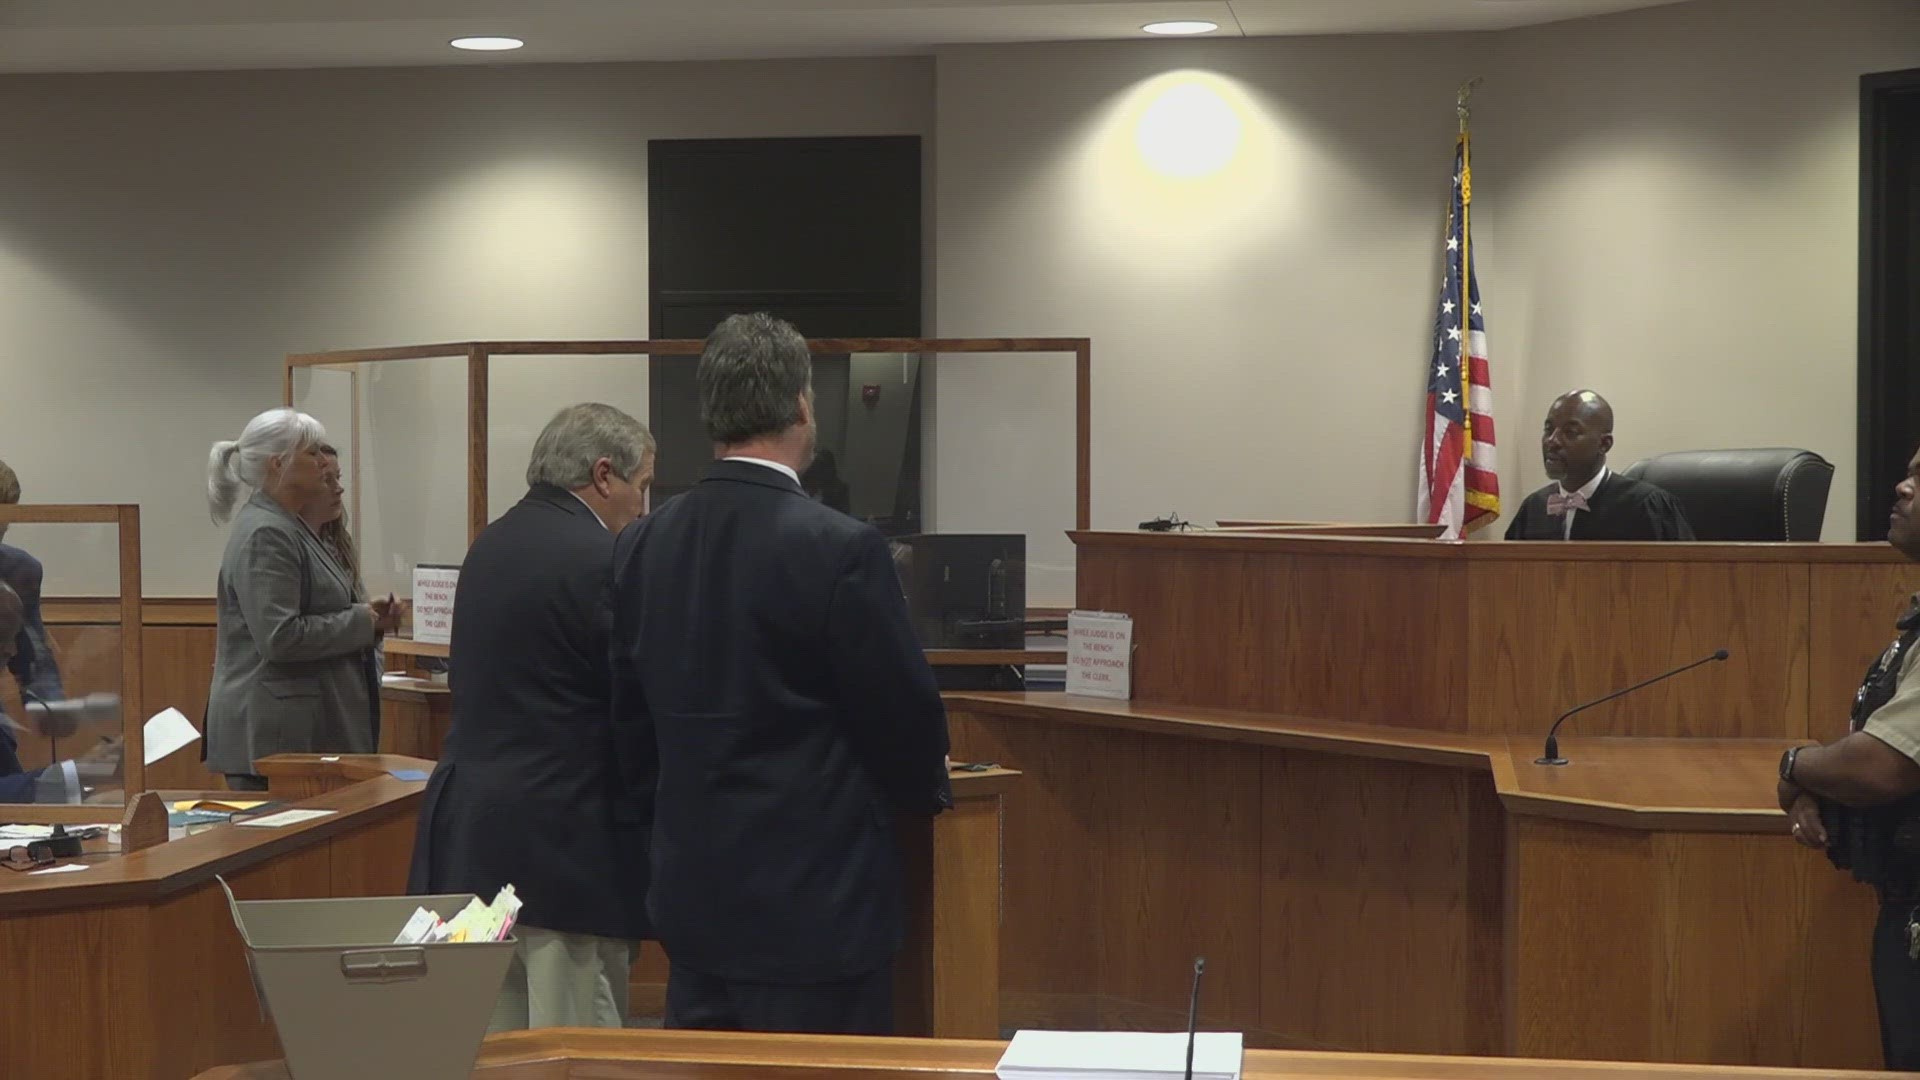 WFMY News 2’s Amber Lake was in court when Donald Beck Jr. appeared and has more on the plea deal reached.